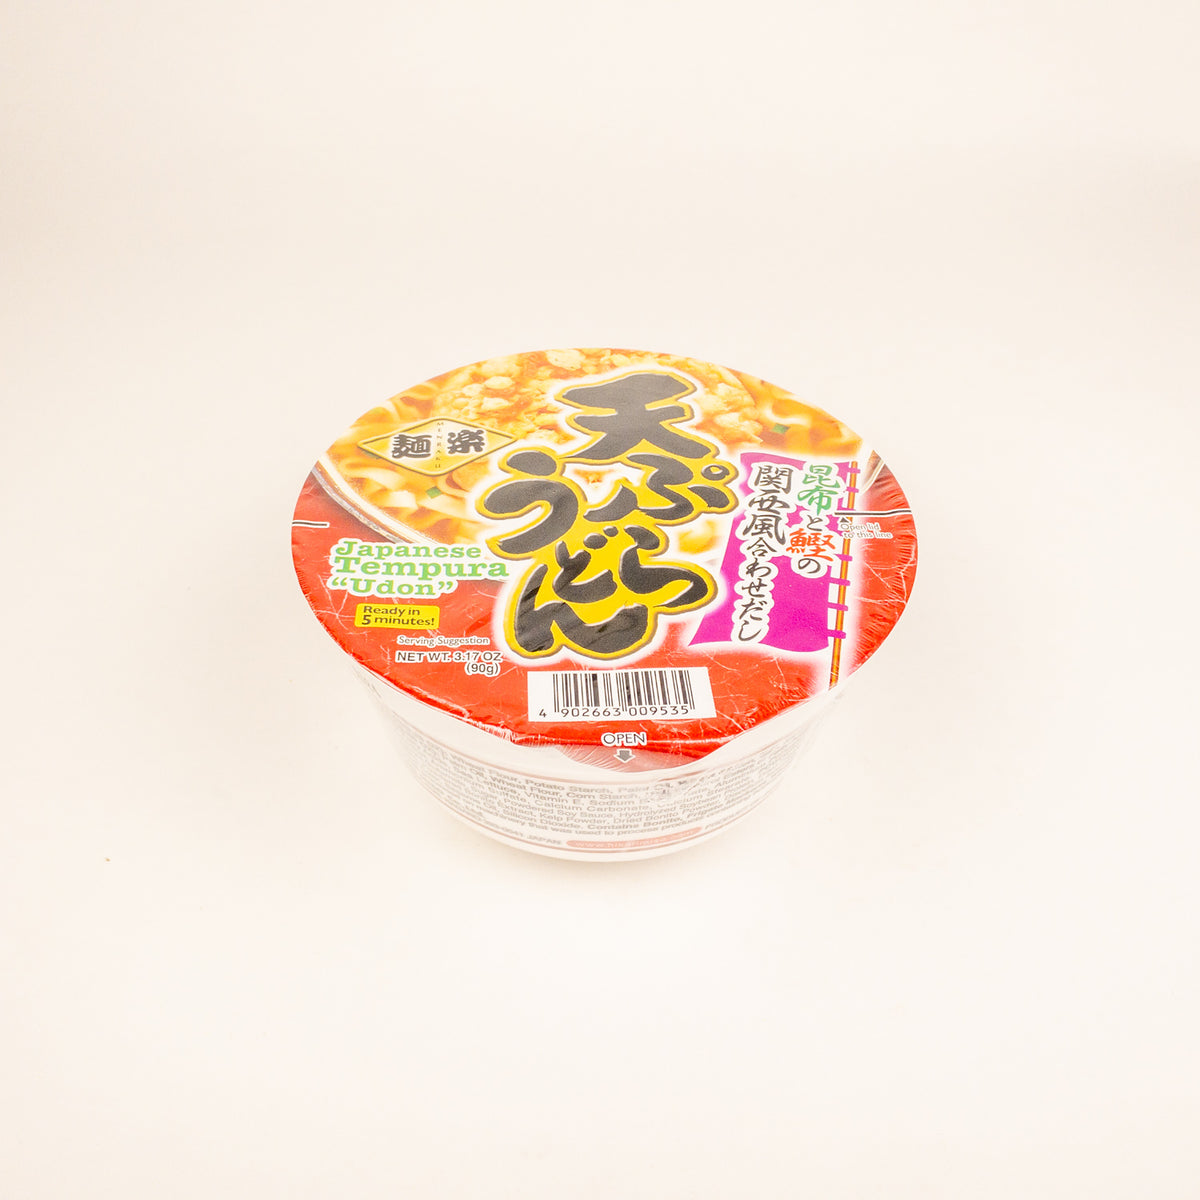 <!--1850--!>Instant Udon Cup